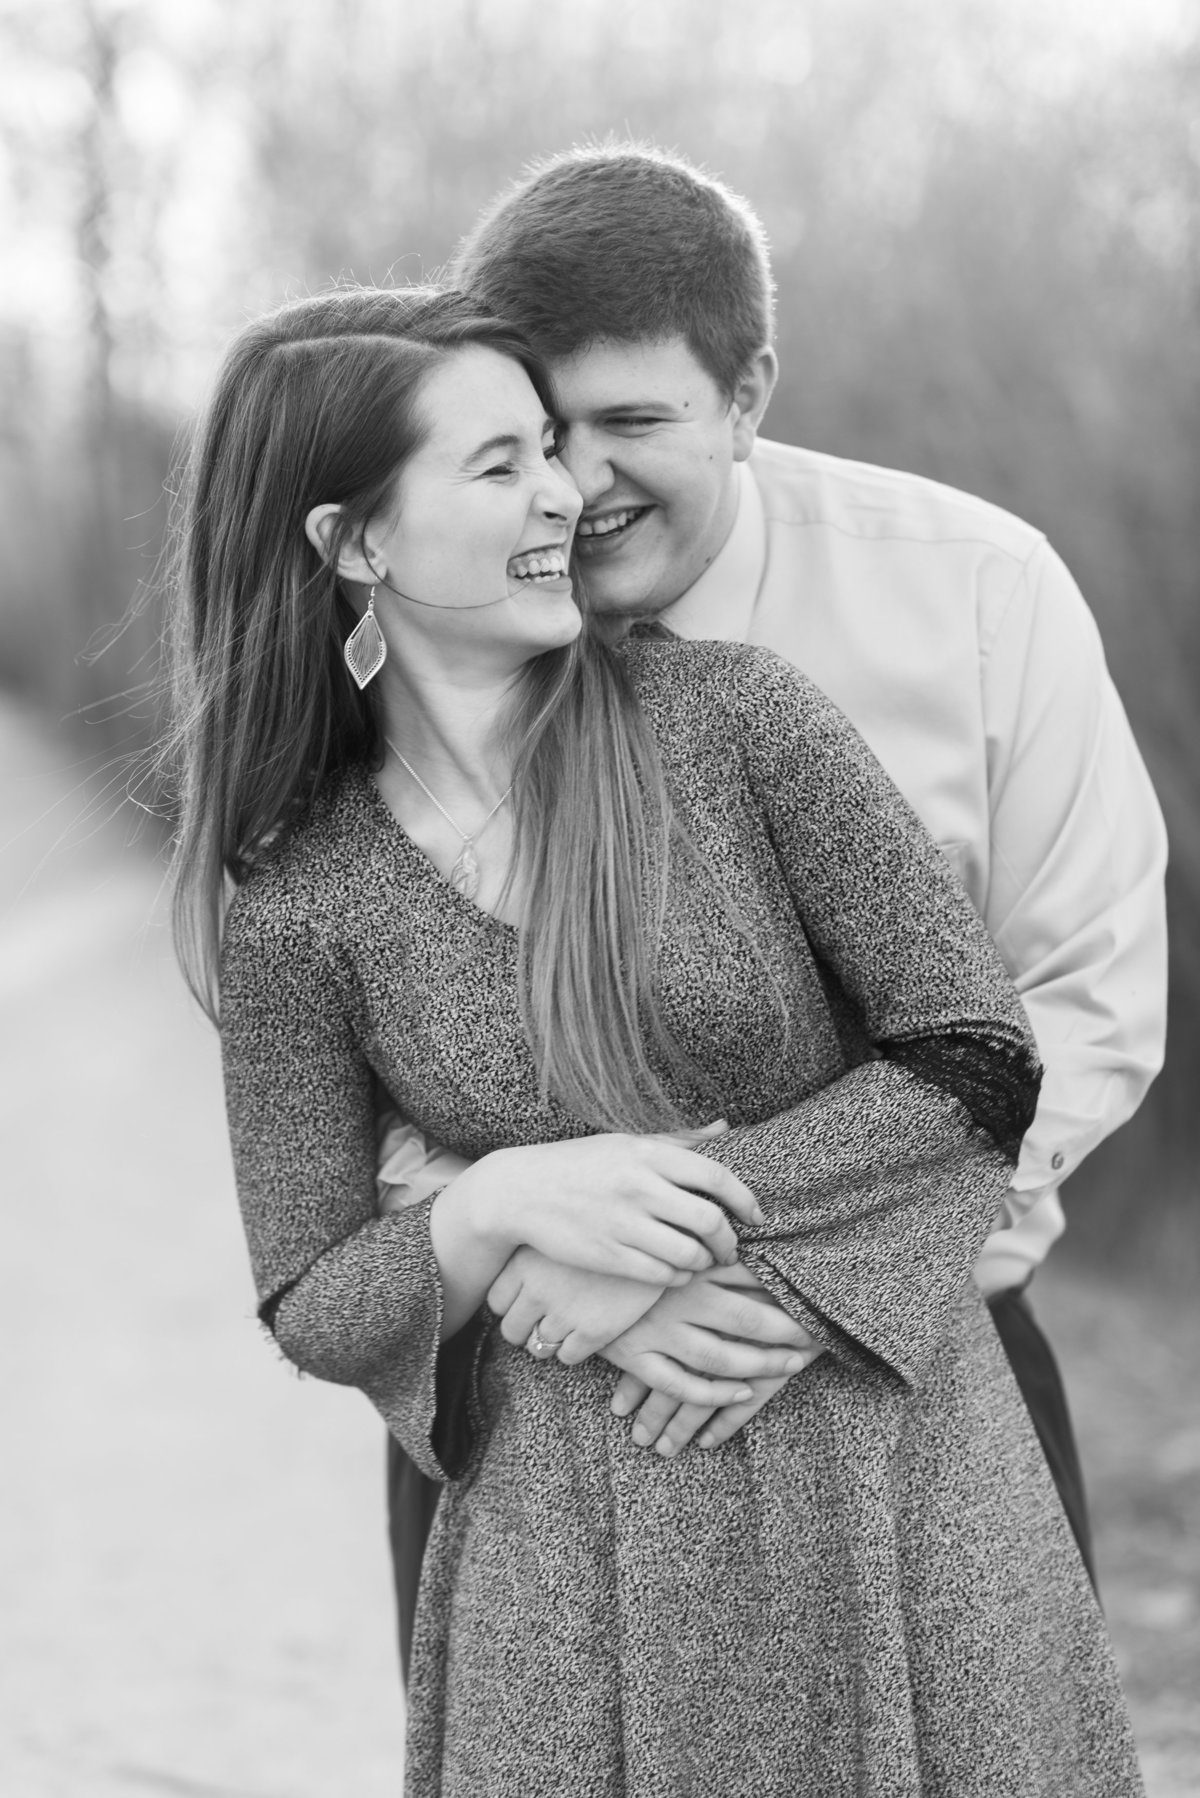 20190302 - Jannae and Forest Engagement Session 094-Edit-2 - A Winter Reid Merrill Park Engagement Session